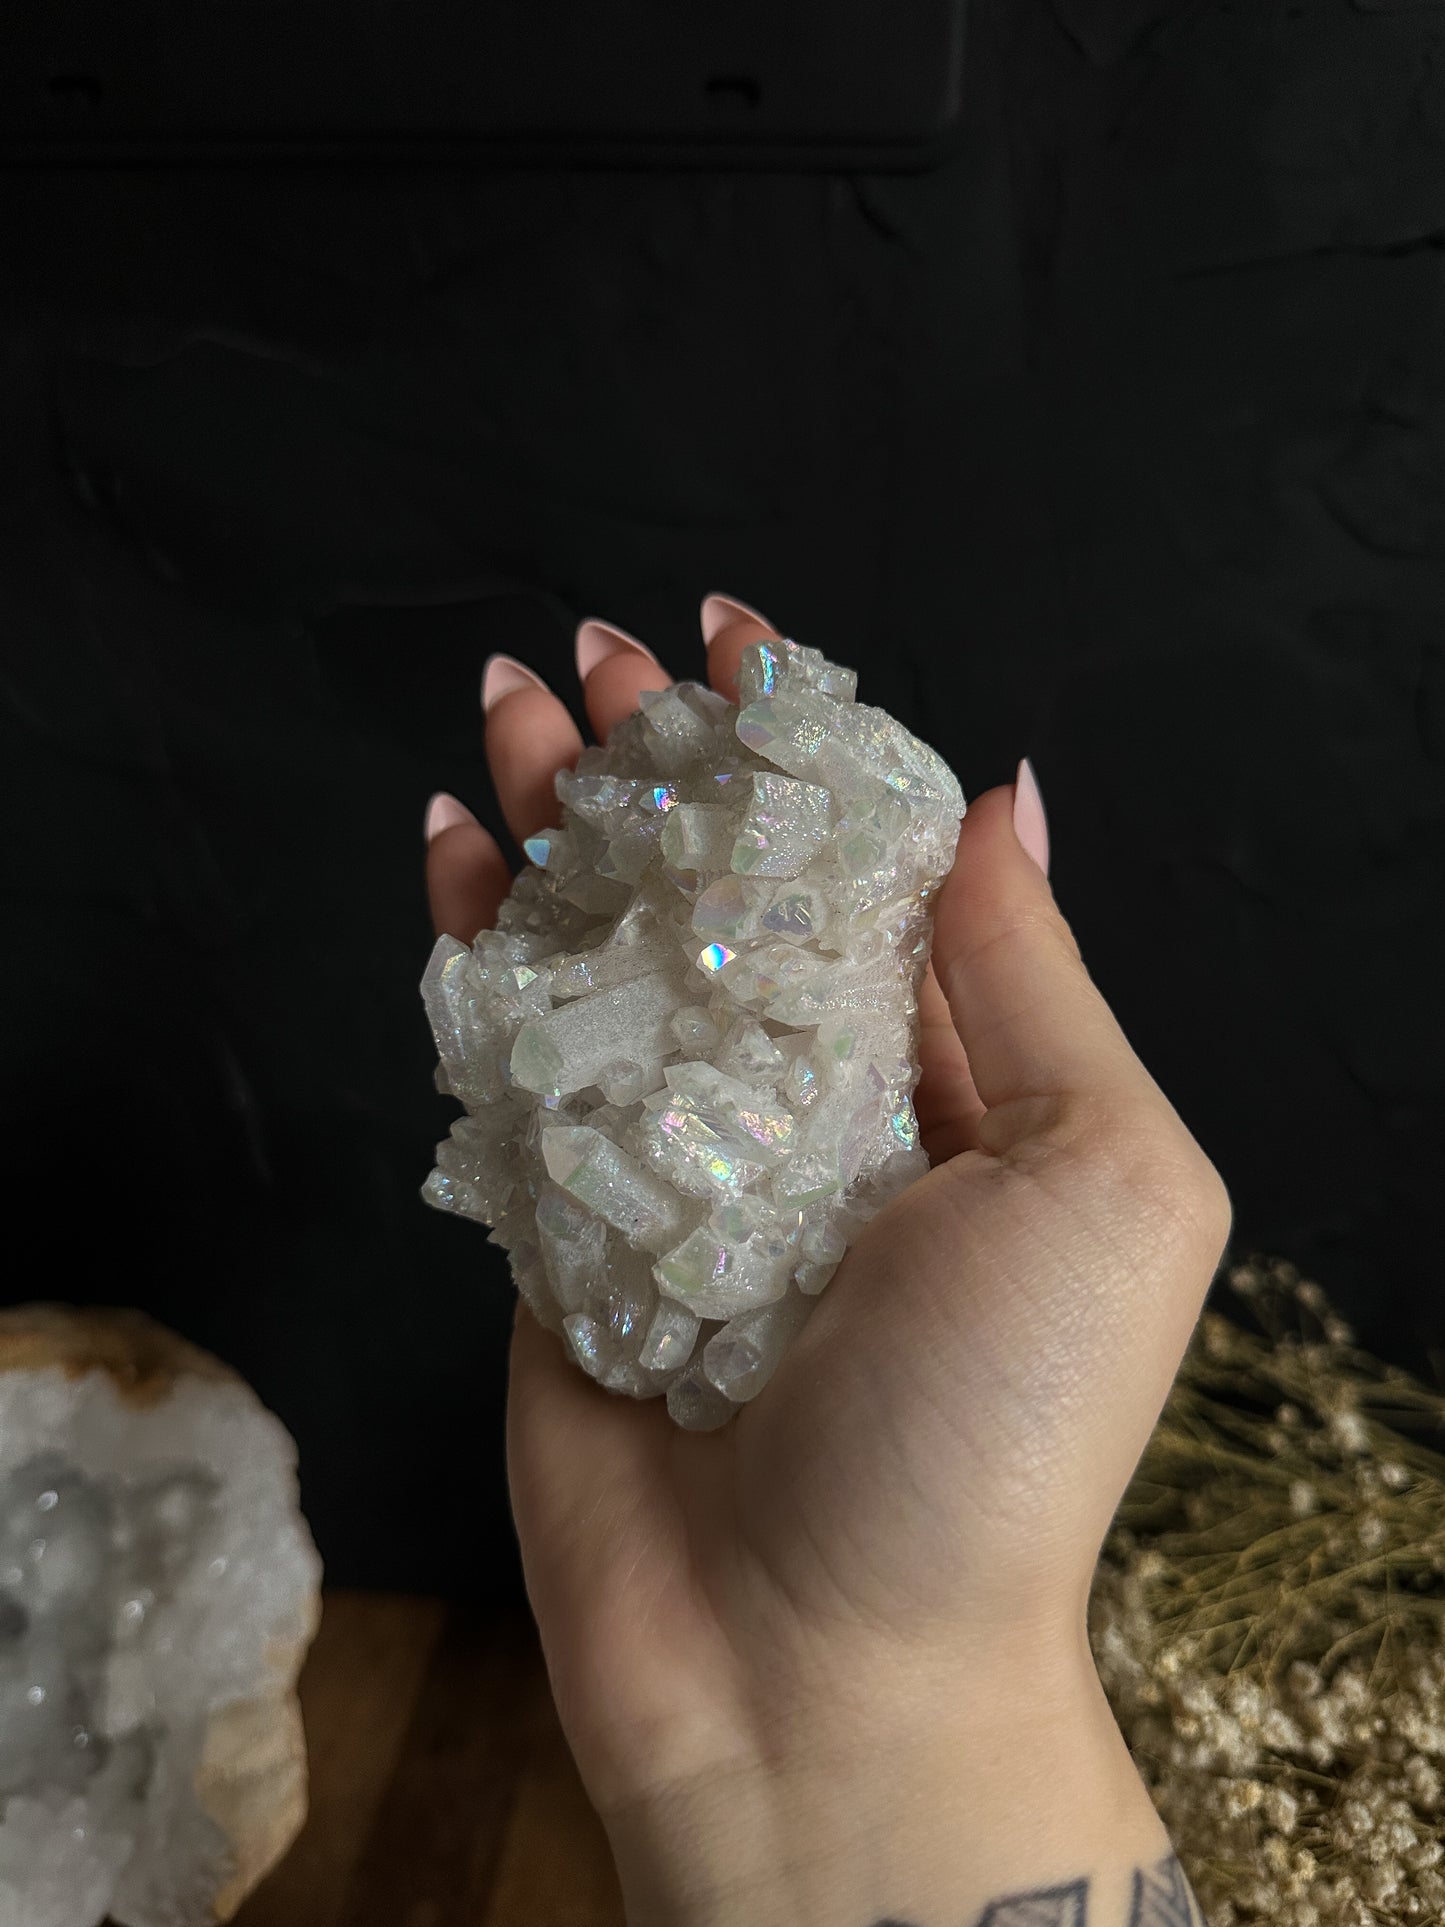 Glimmering Angel Aura Quartz Clusters, adorned with iridescent pastel hues, evoke a sense of celestial beauty. Their ethereal charm makes them an enchanting addition to any space or a cherished gift for those seeking serenity and harmony.